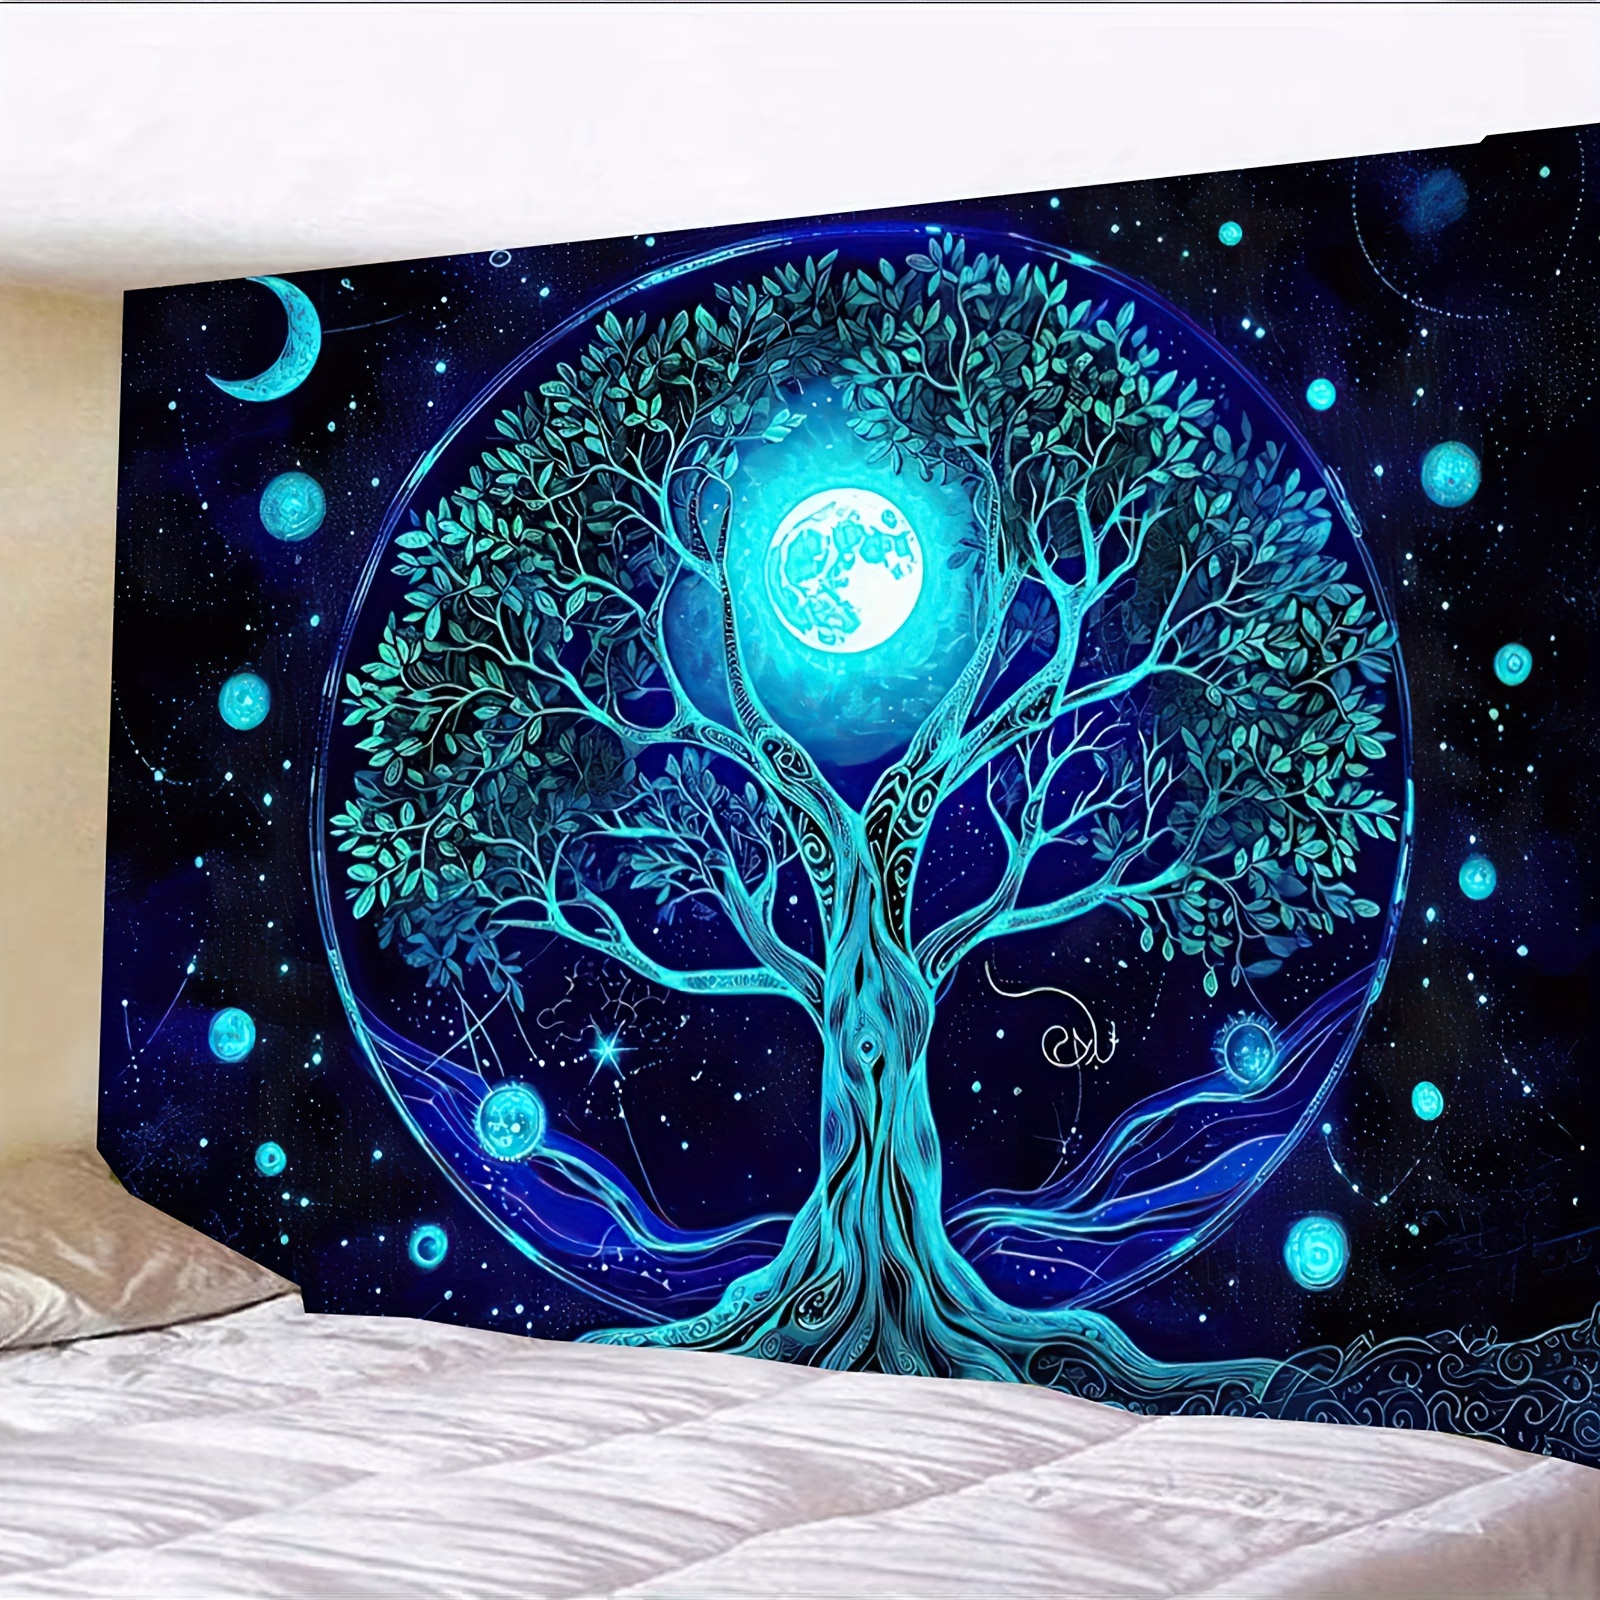 

1pc Tapestry, Polyester Blacklight Tapestry, Life Tree, Wall Hanging For Living Room Bedroom Office, Home Decor Room Decor Party Decor